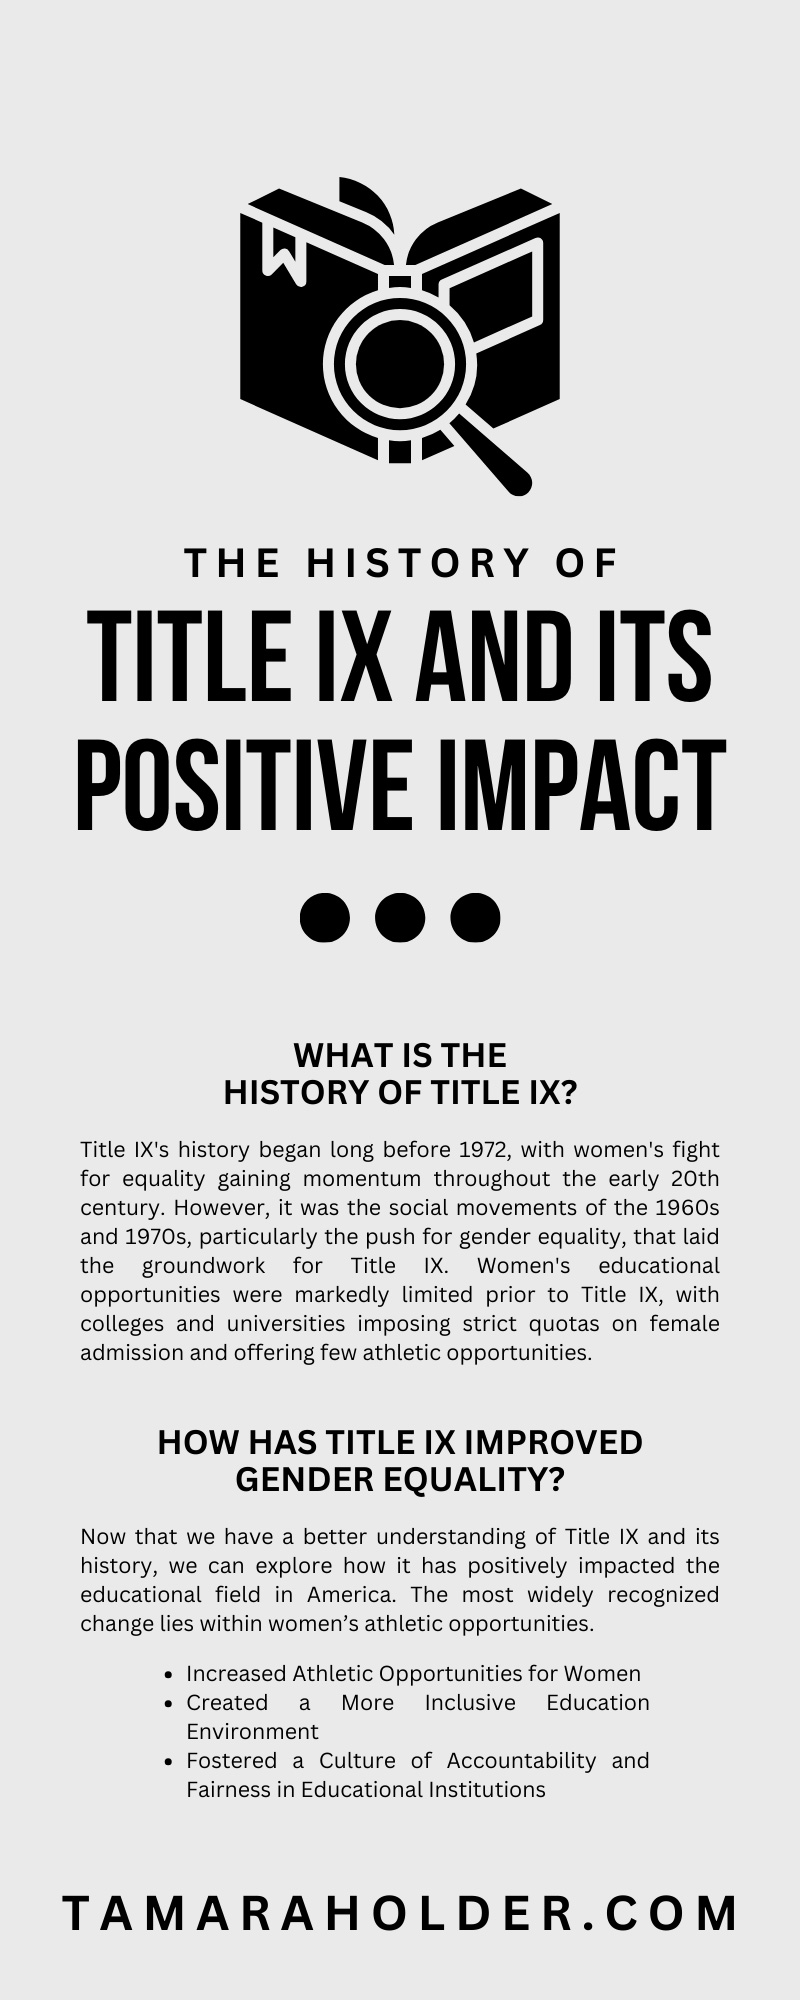 The History of Title IX and Its Positive Impact